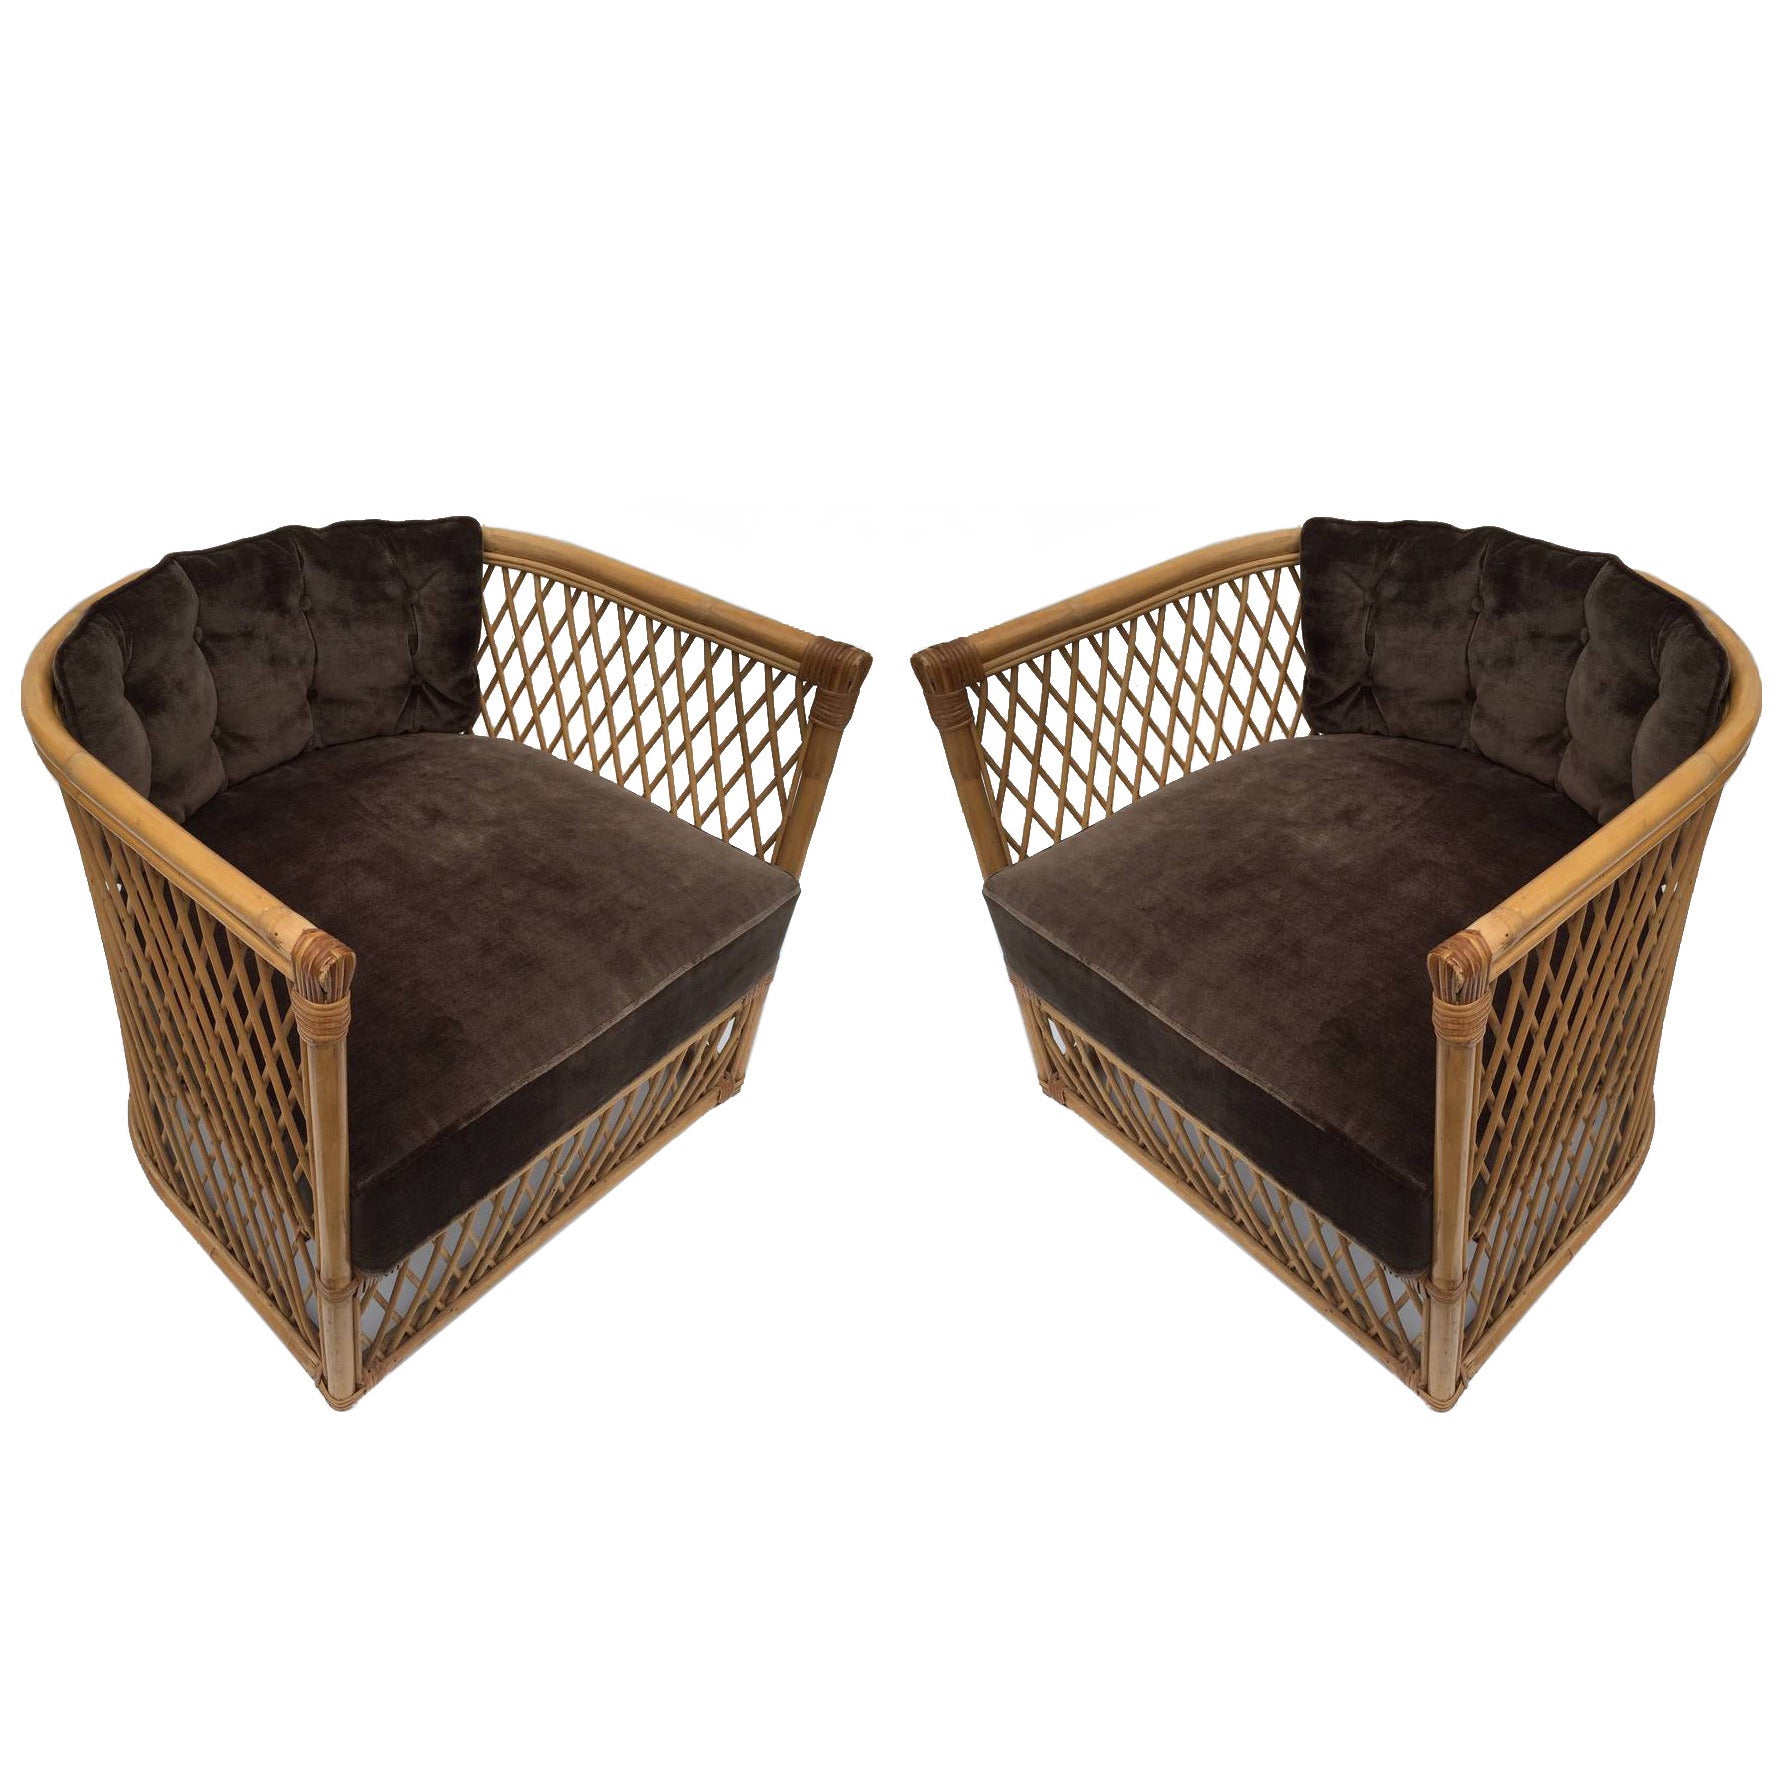 Pair of Rattan Chairs after Jean Royere